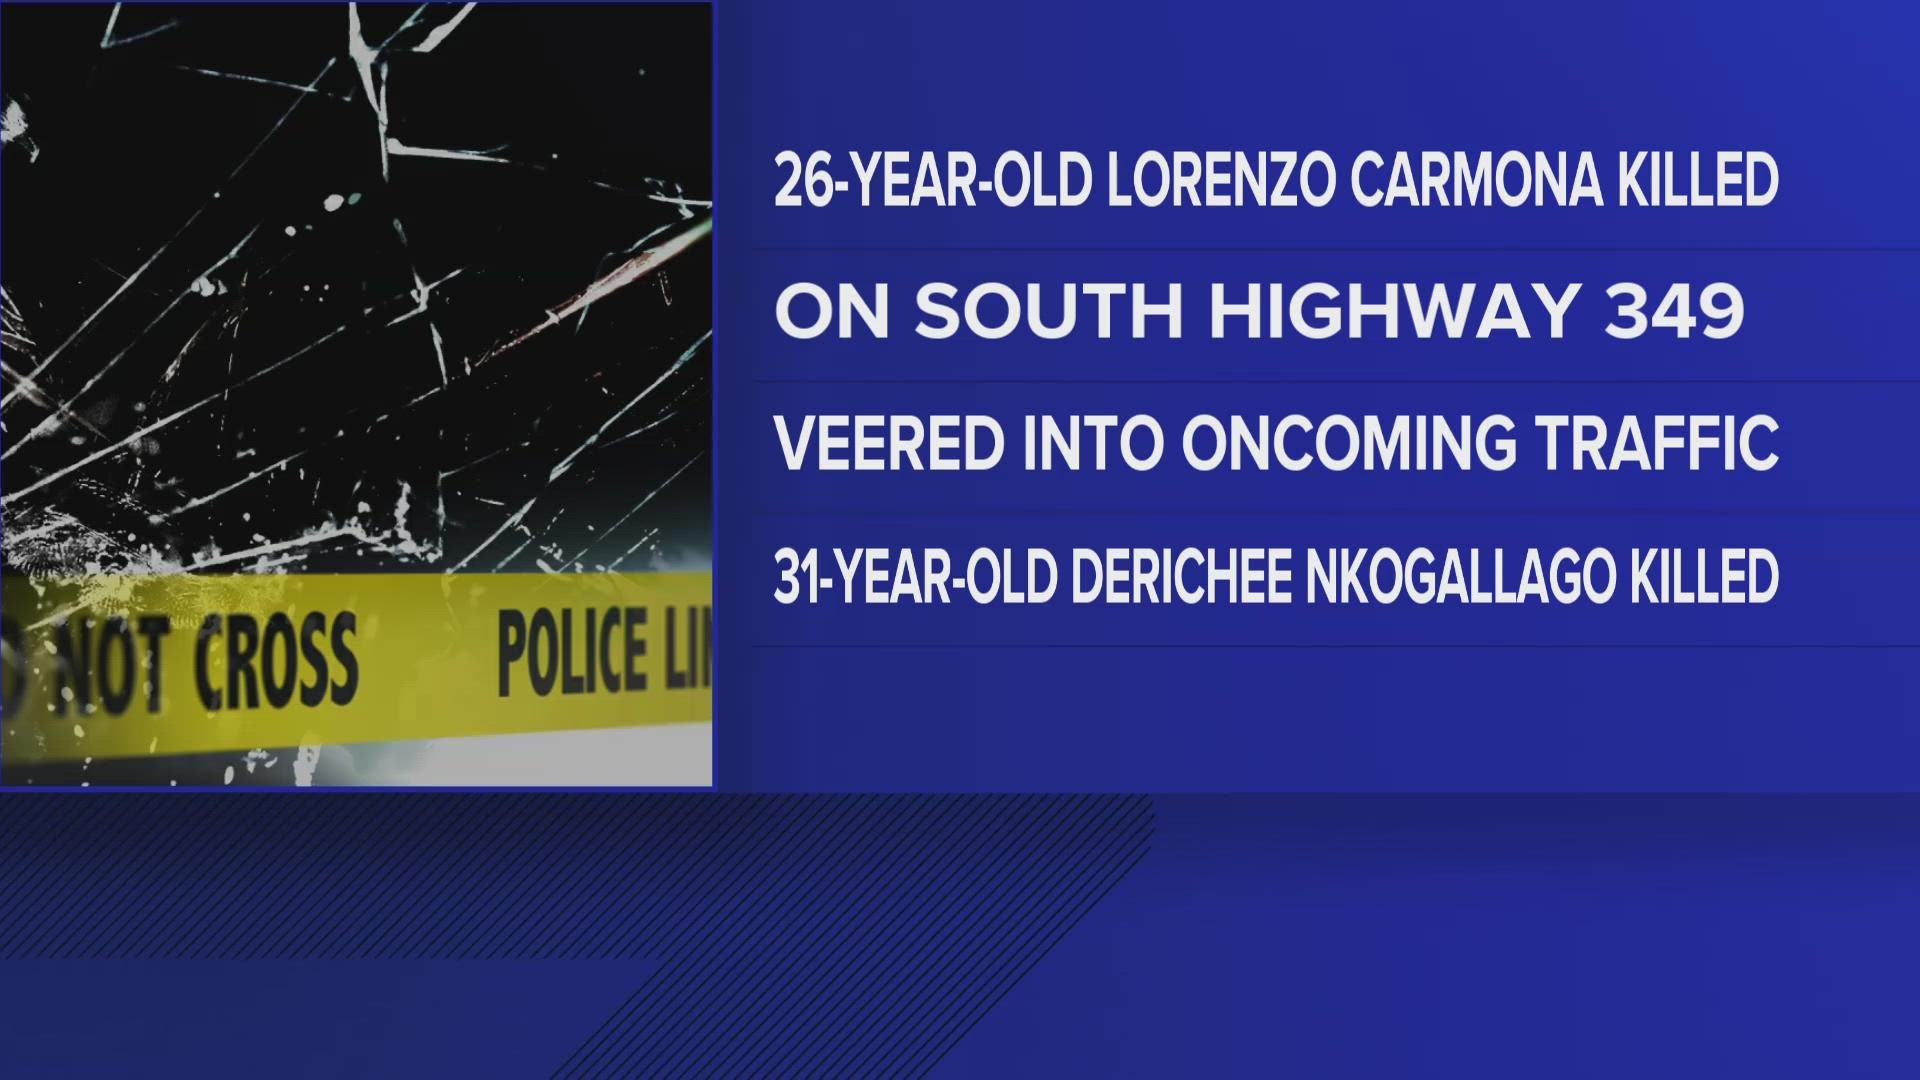 26-year-old Lorenzo Carmona and 31-year-old DeRichee Nkogallago were pronounced dead at the scene on January 26.